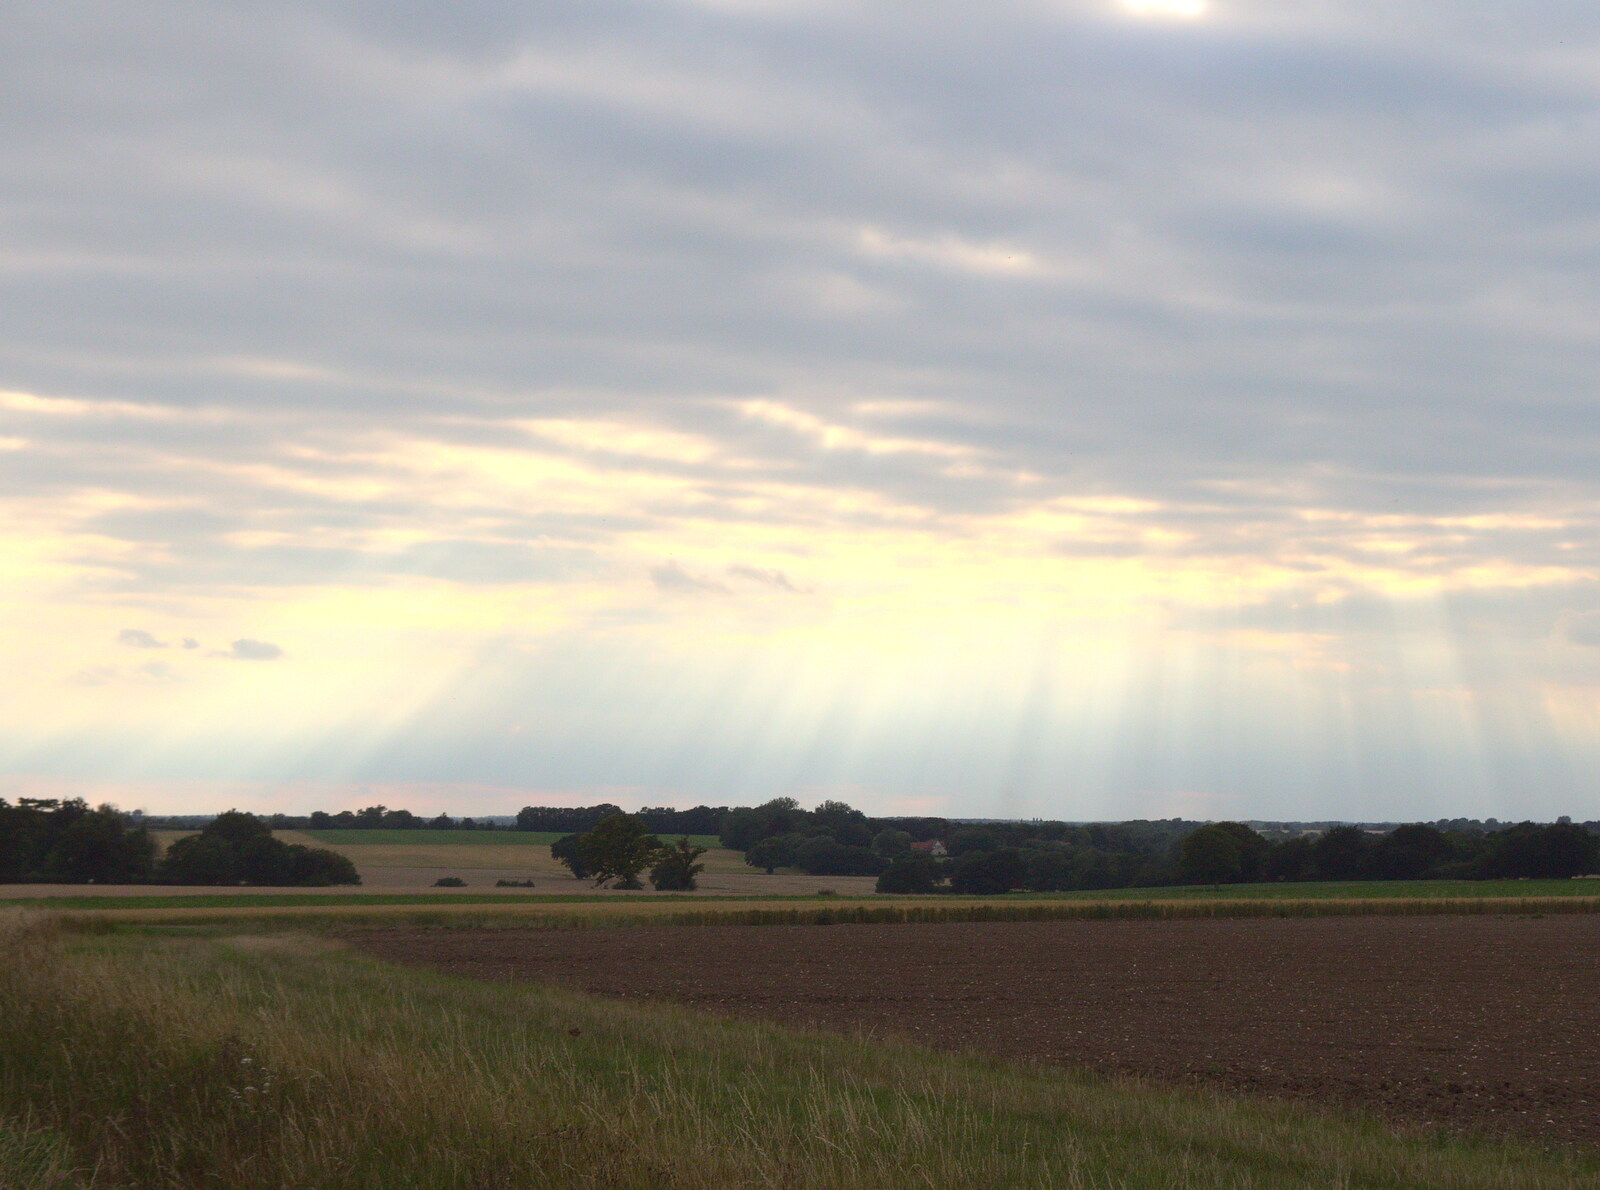 Impressive crepuscular rays on the way to Redgrave from The BSCC at Redgrave and Station 119, Eye, Suffolk - 17th July 2020